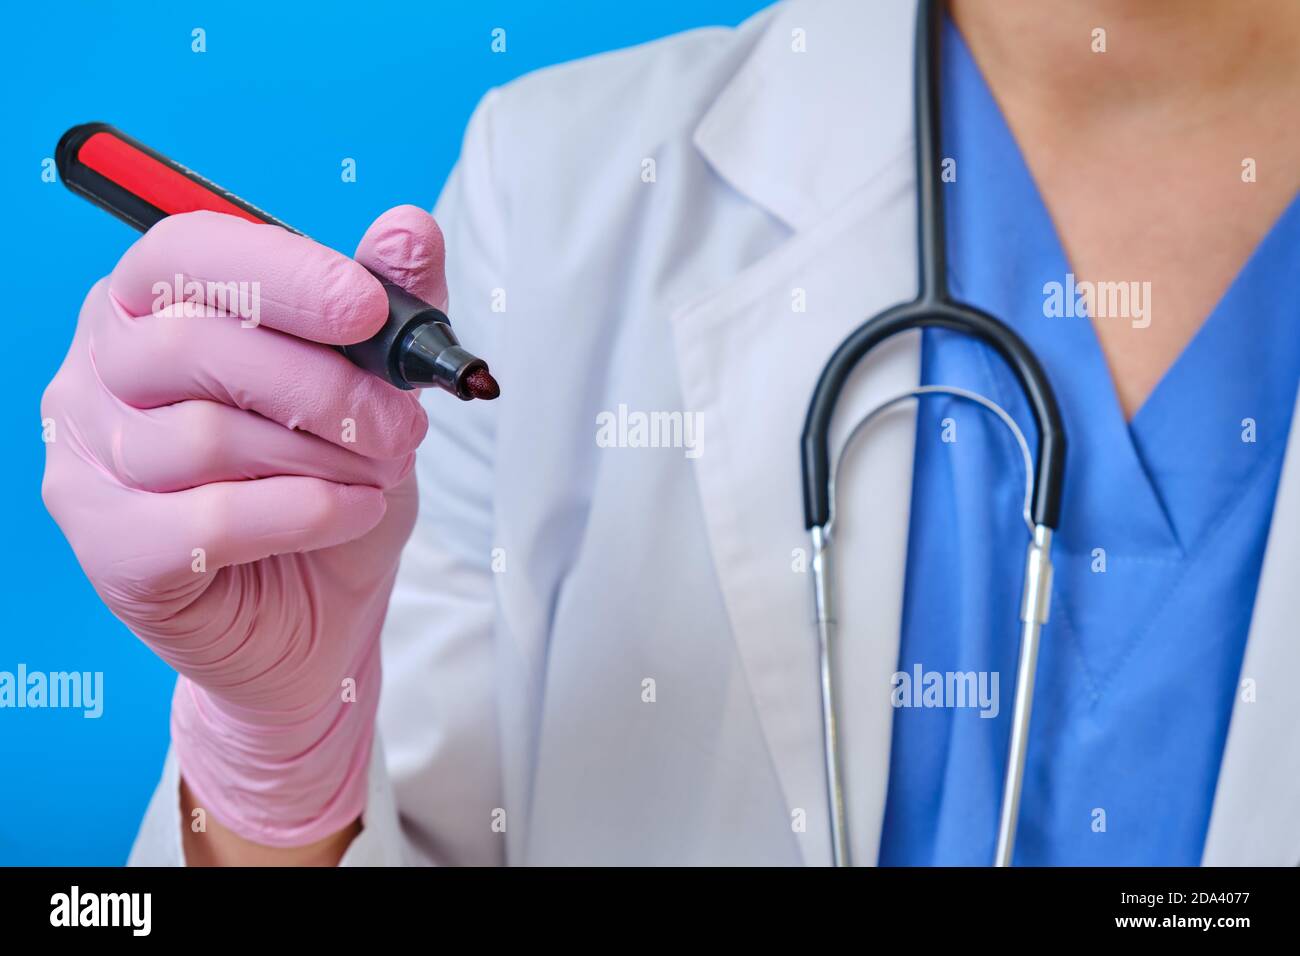 Doctor with a marker in hand, close-up. A nurse in a medical